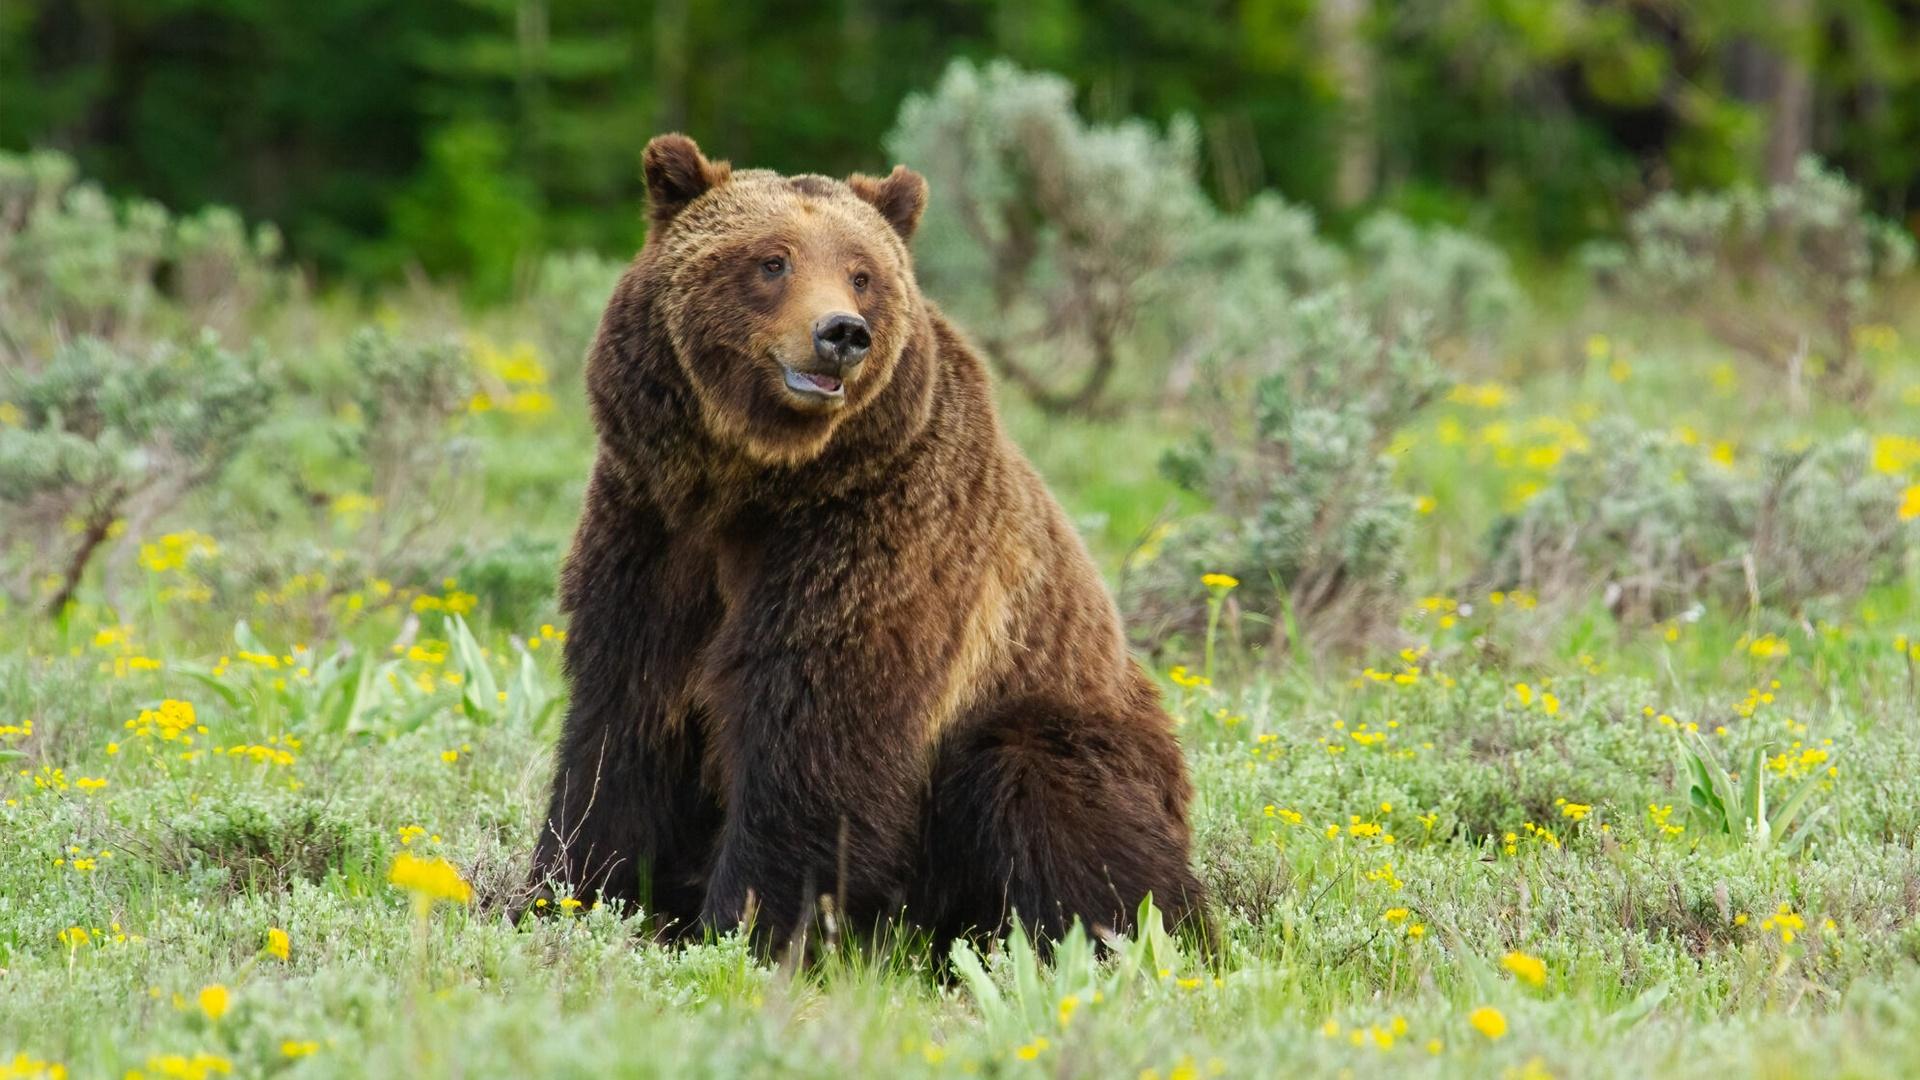 Grizzly bear sitting in woods with yellow blossoms